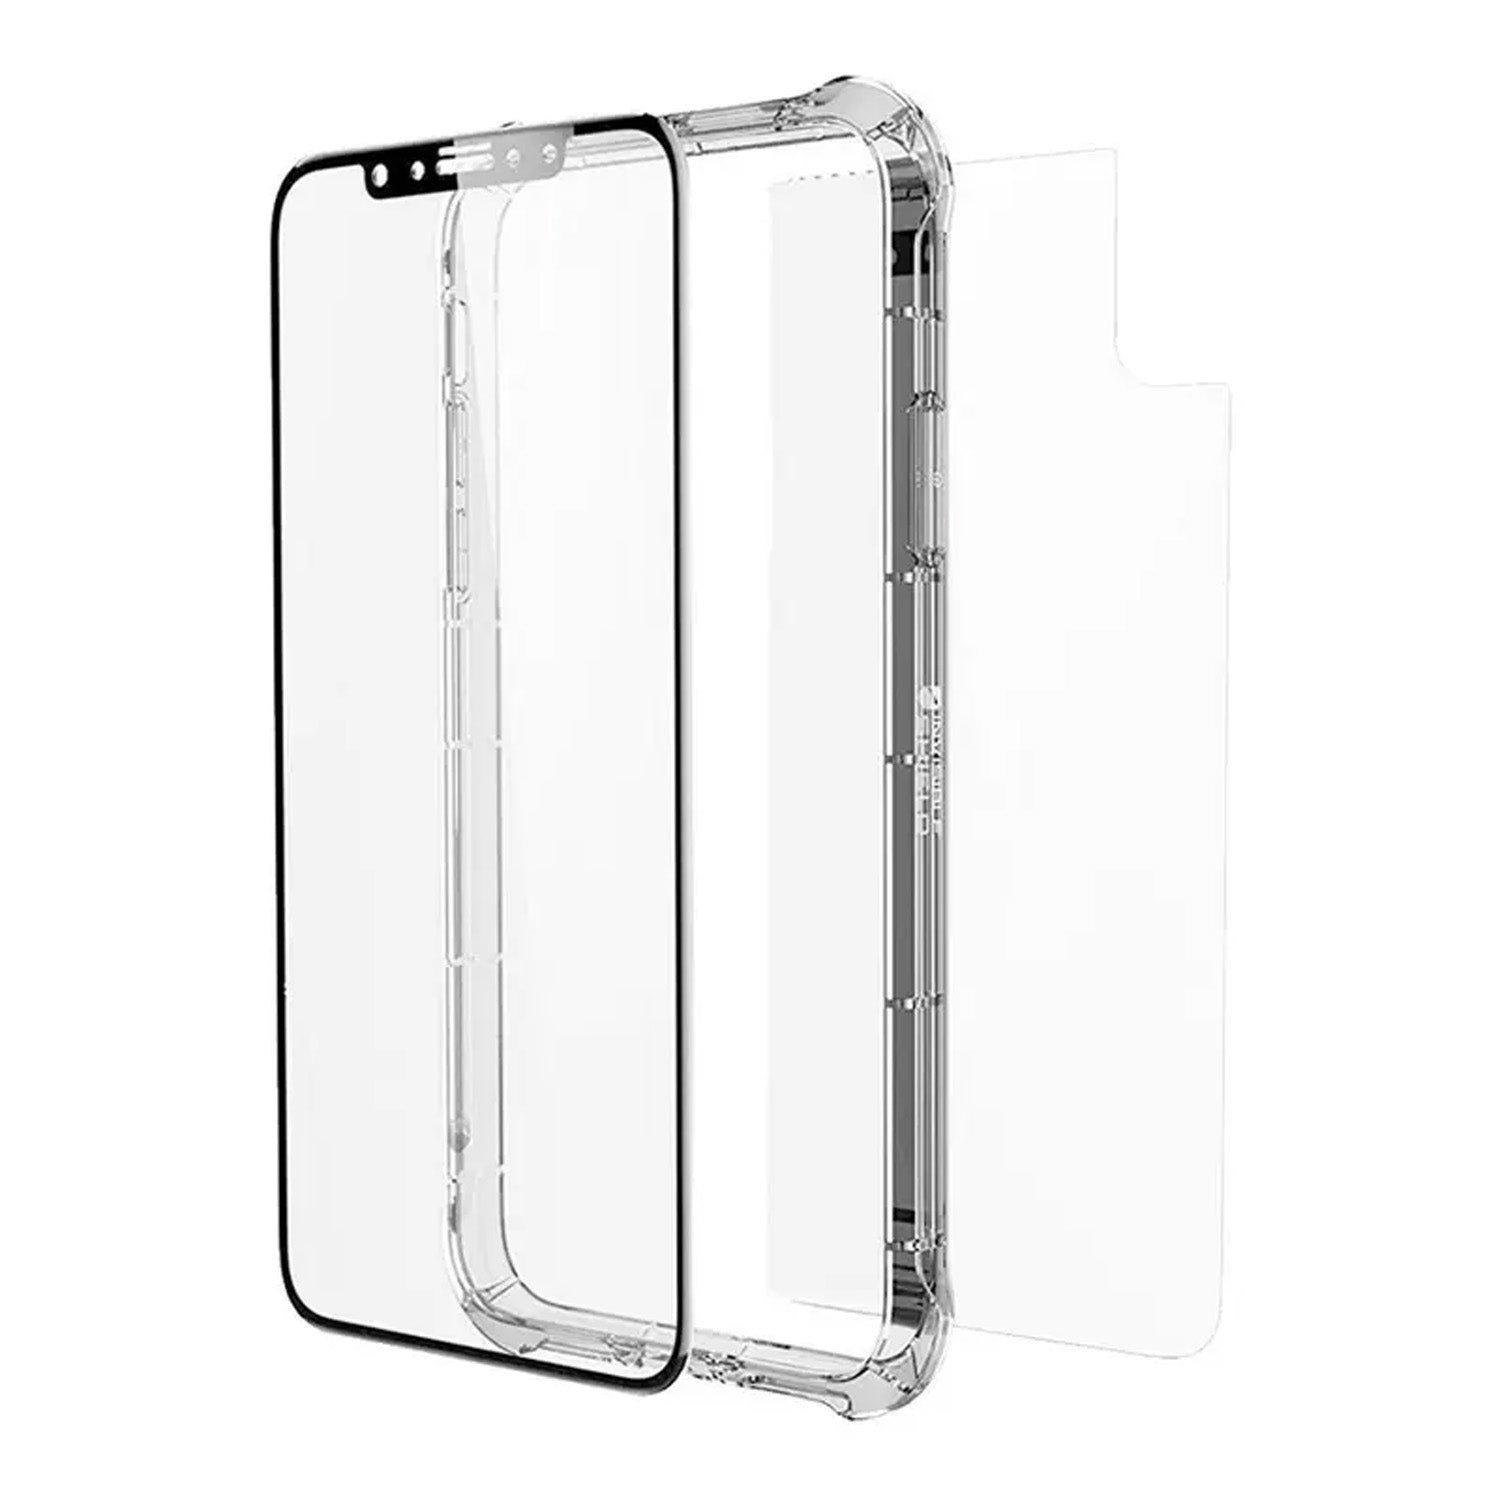 ZAGG Invisible Shield iPhone X 360 Protection Case + Glass Curve Screen Protector